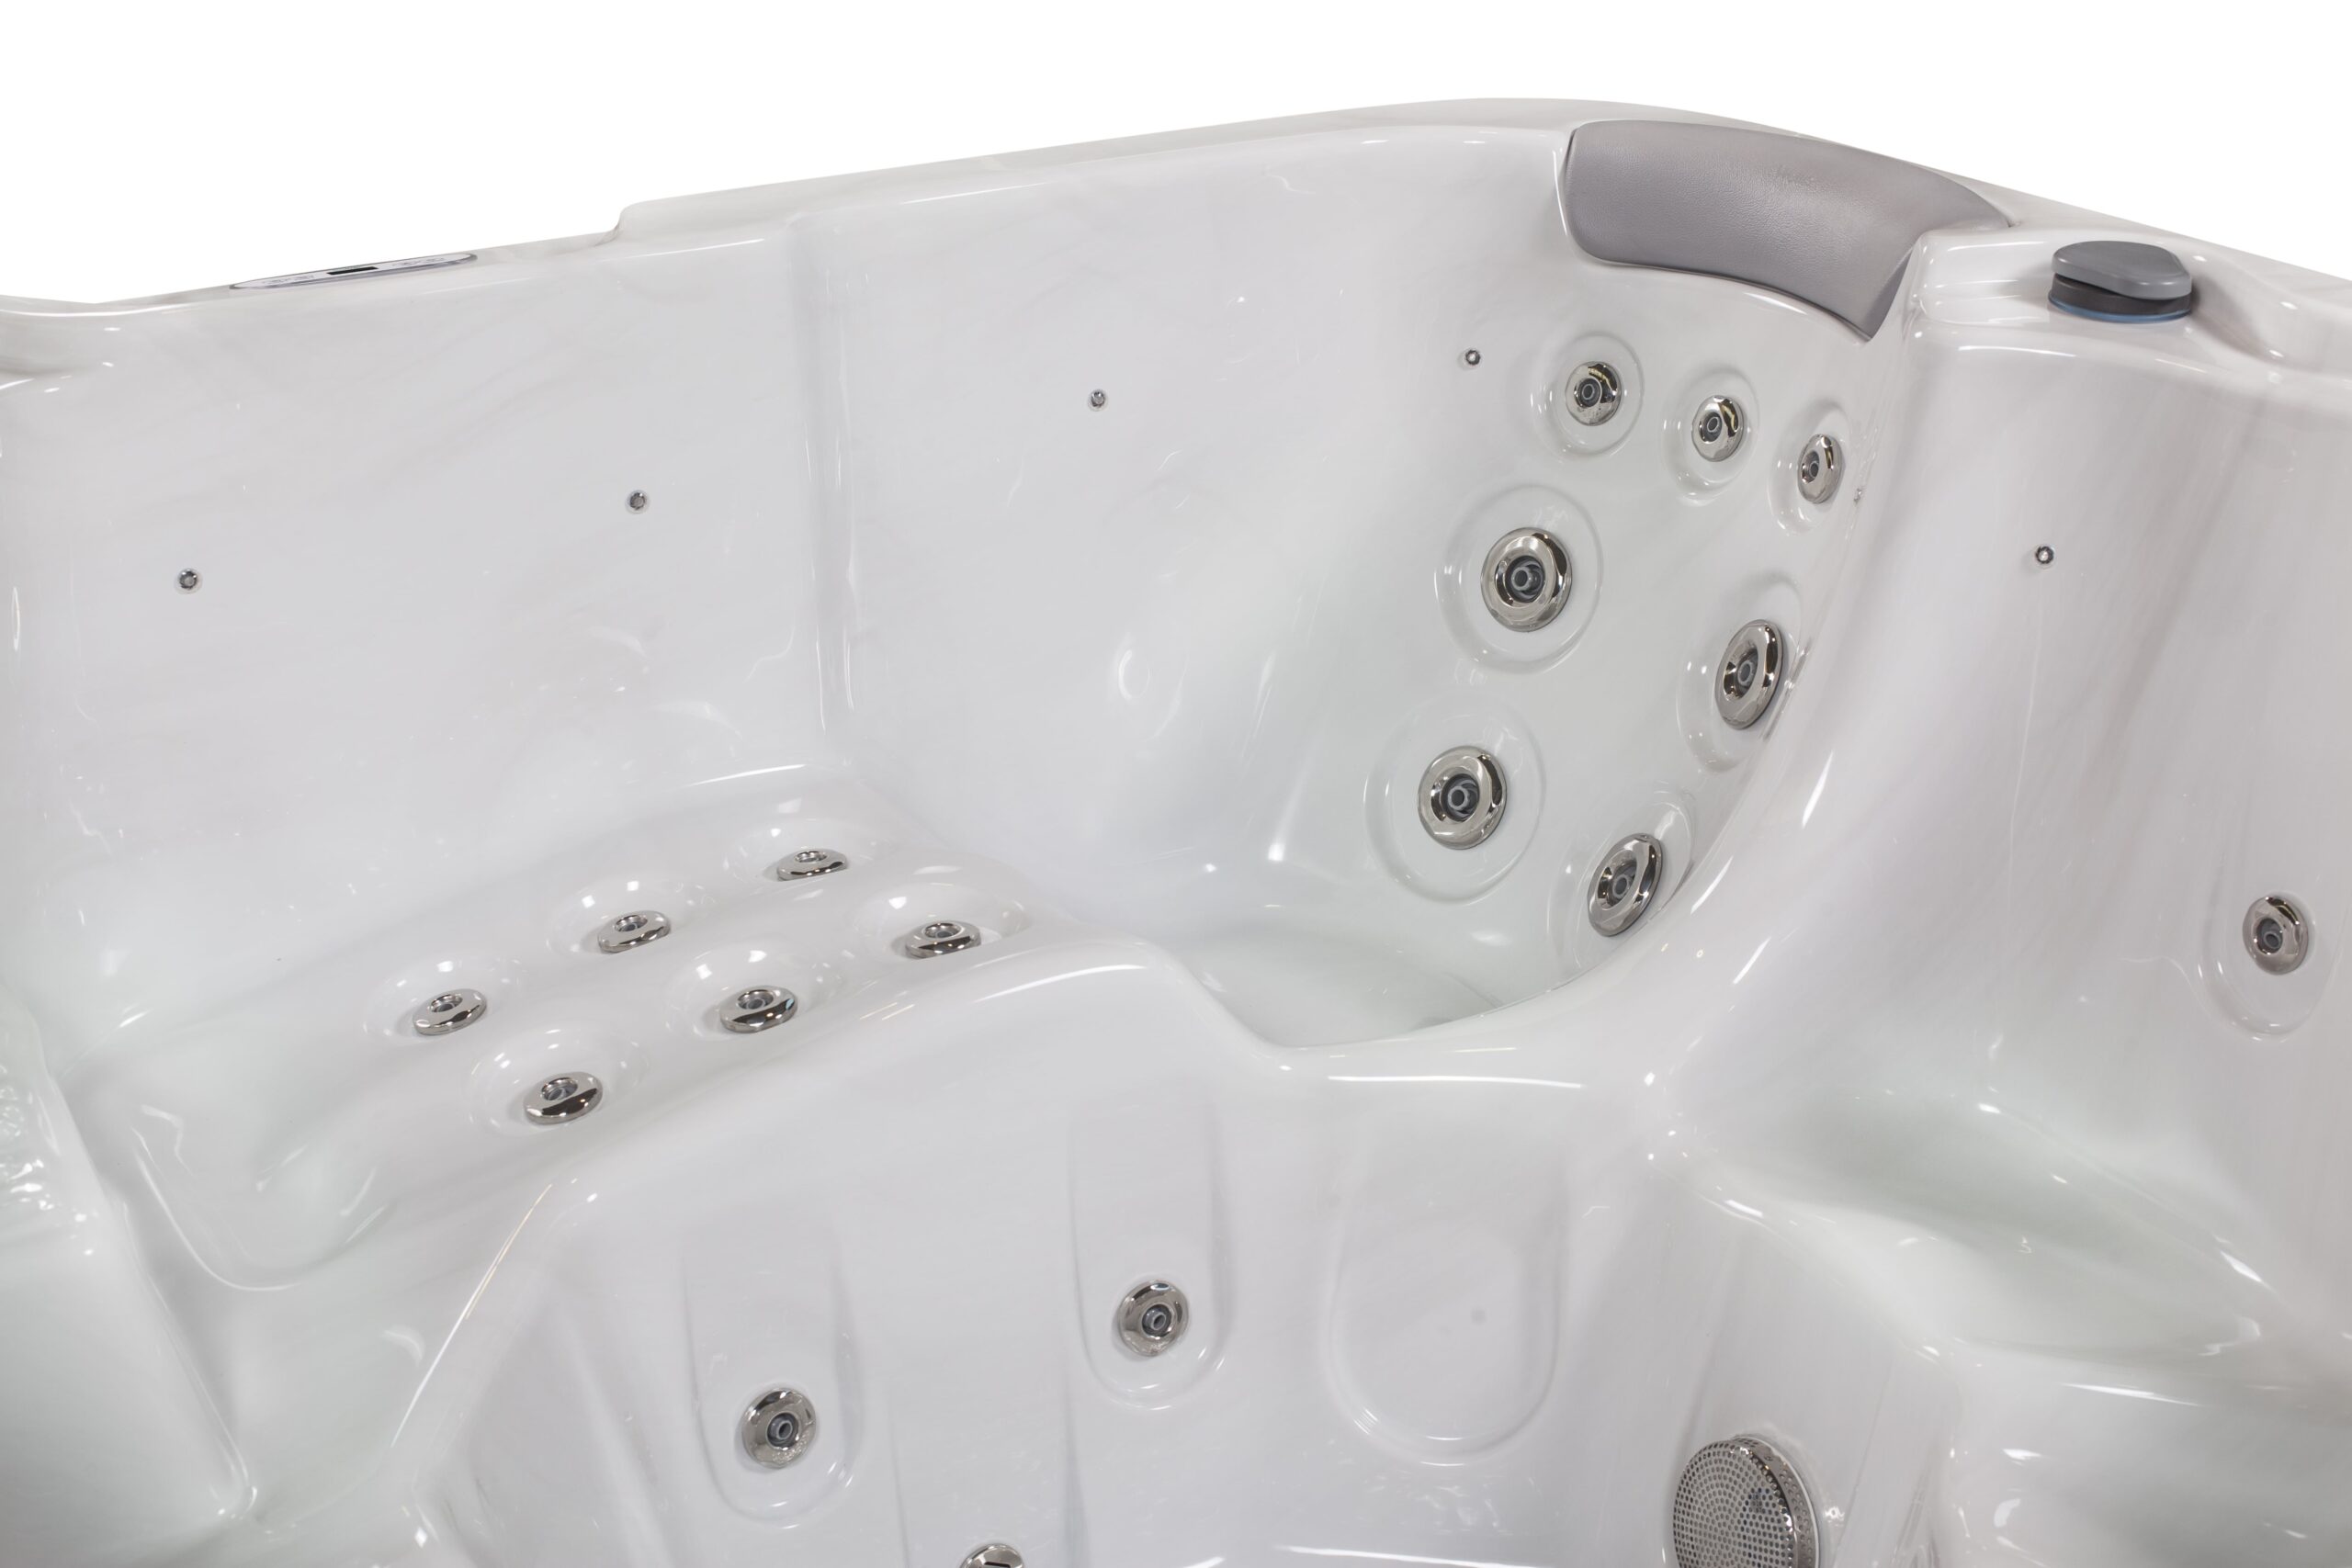 Hydrotherapy hot tub jets for joint pain